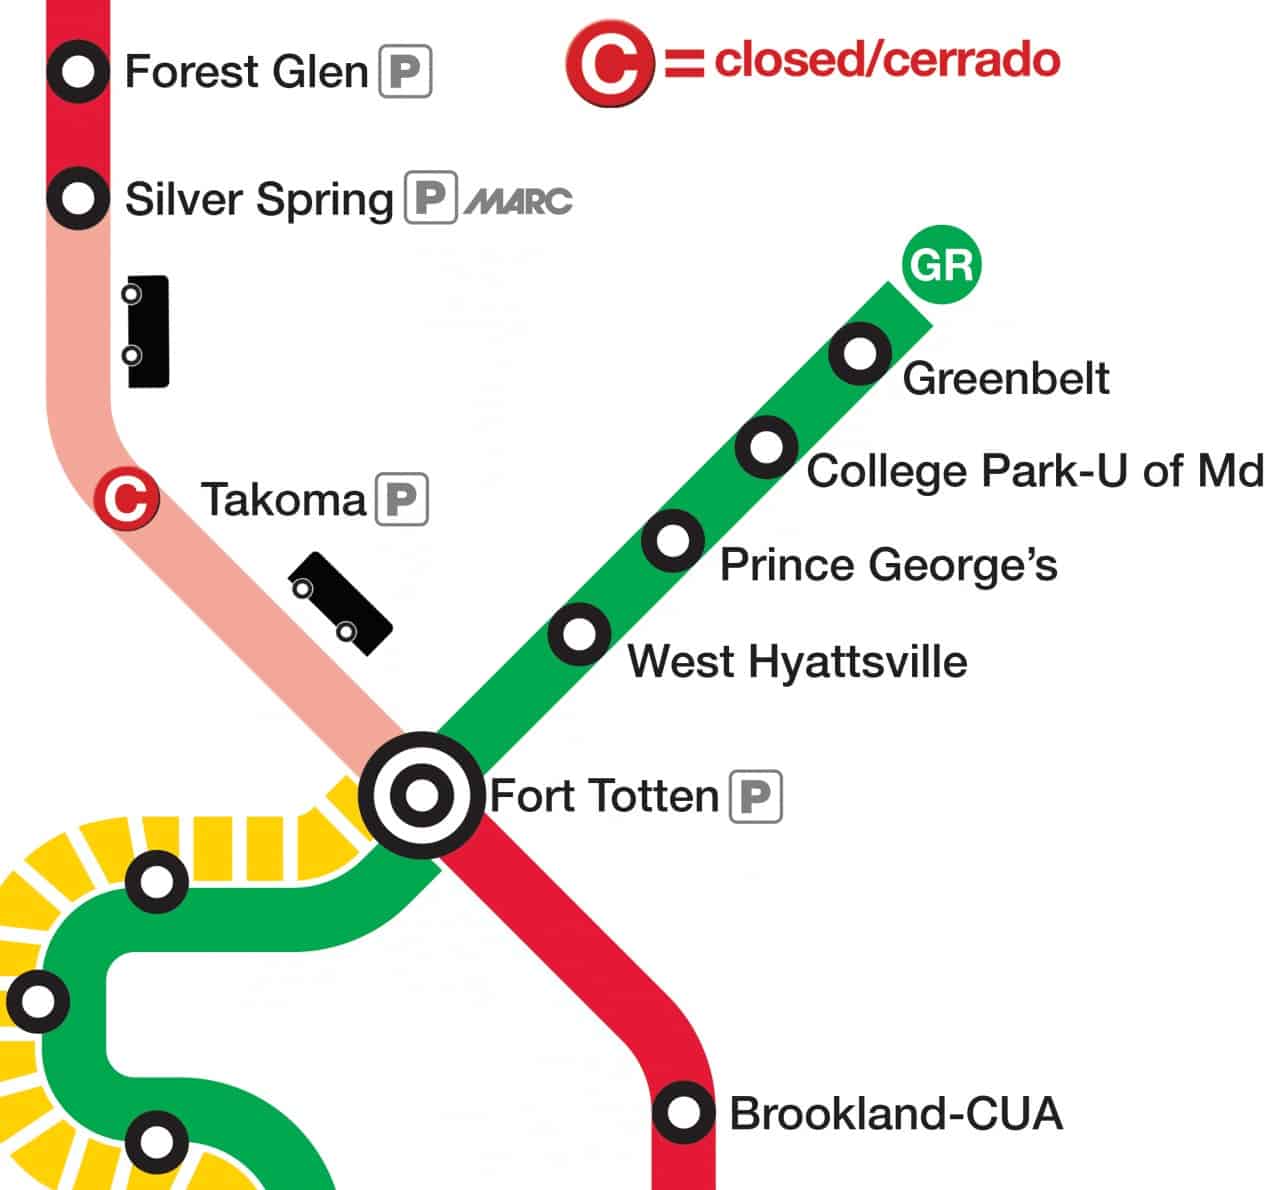 Red Line to temporarily close between Silver Spring and Fort Totten